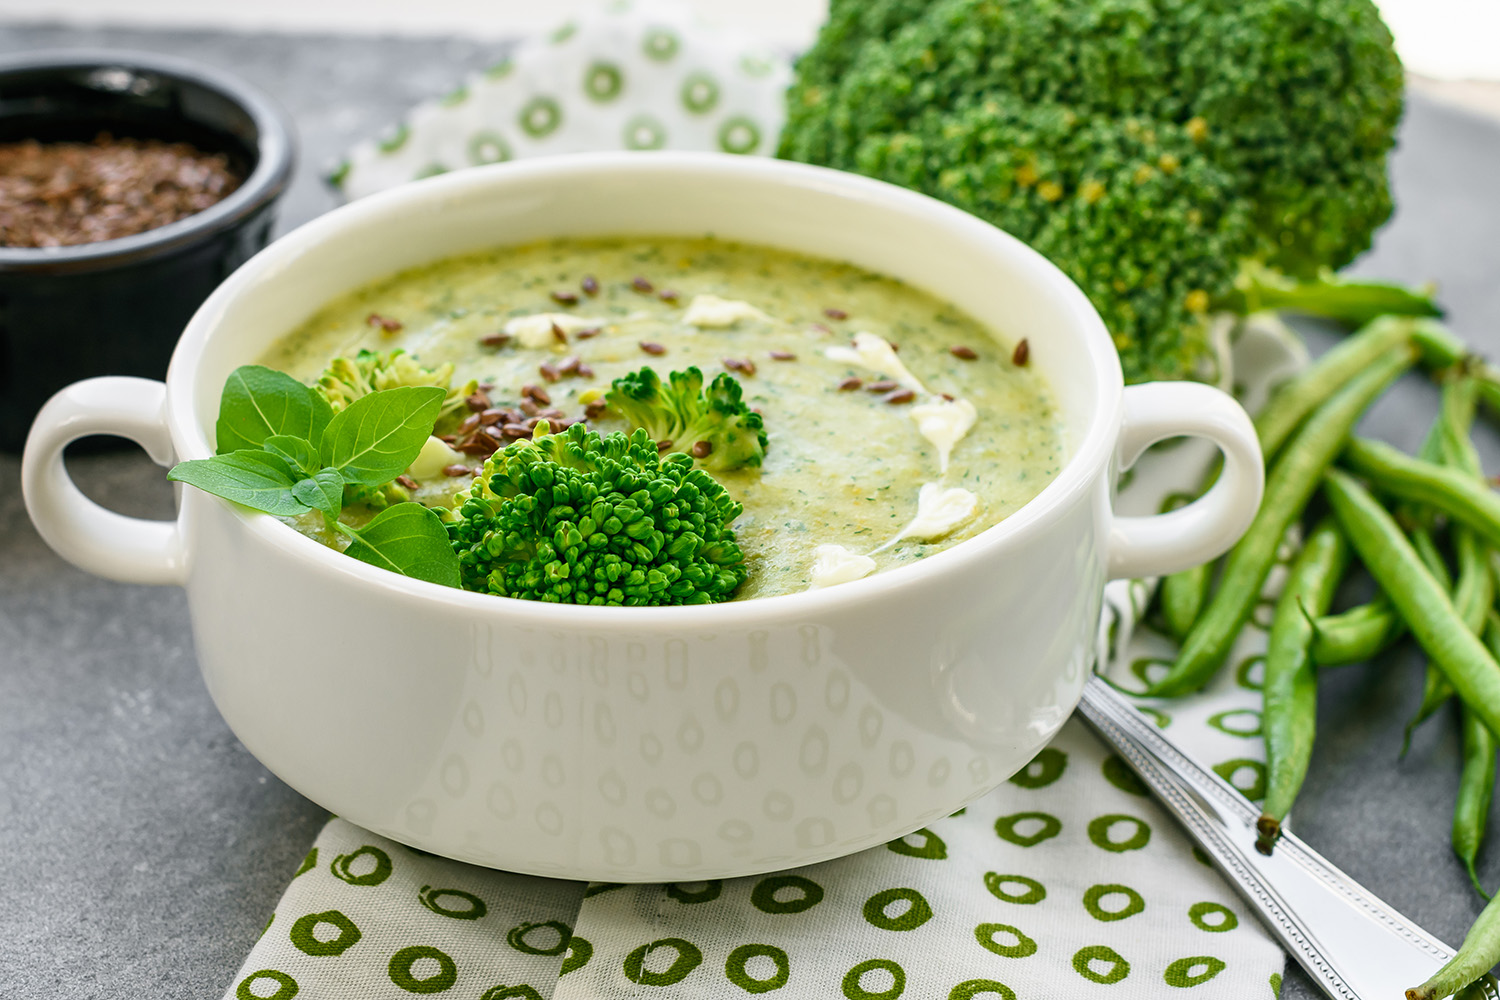 Why This Healthy Cream of Broccoli Soup is a Nutritional Power Boost ...